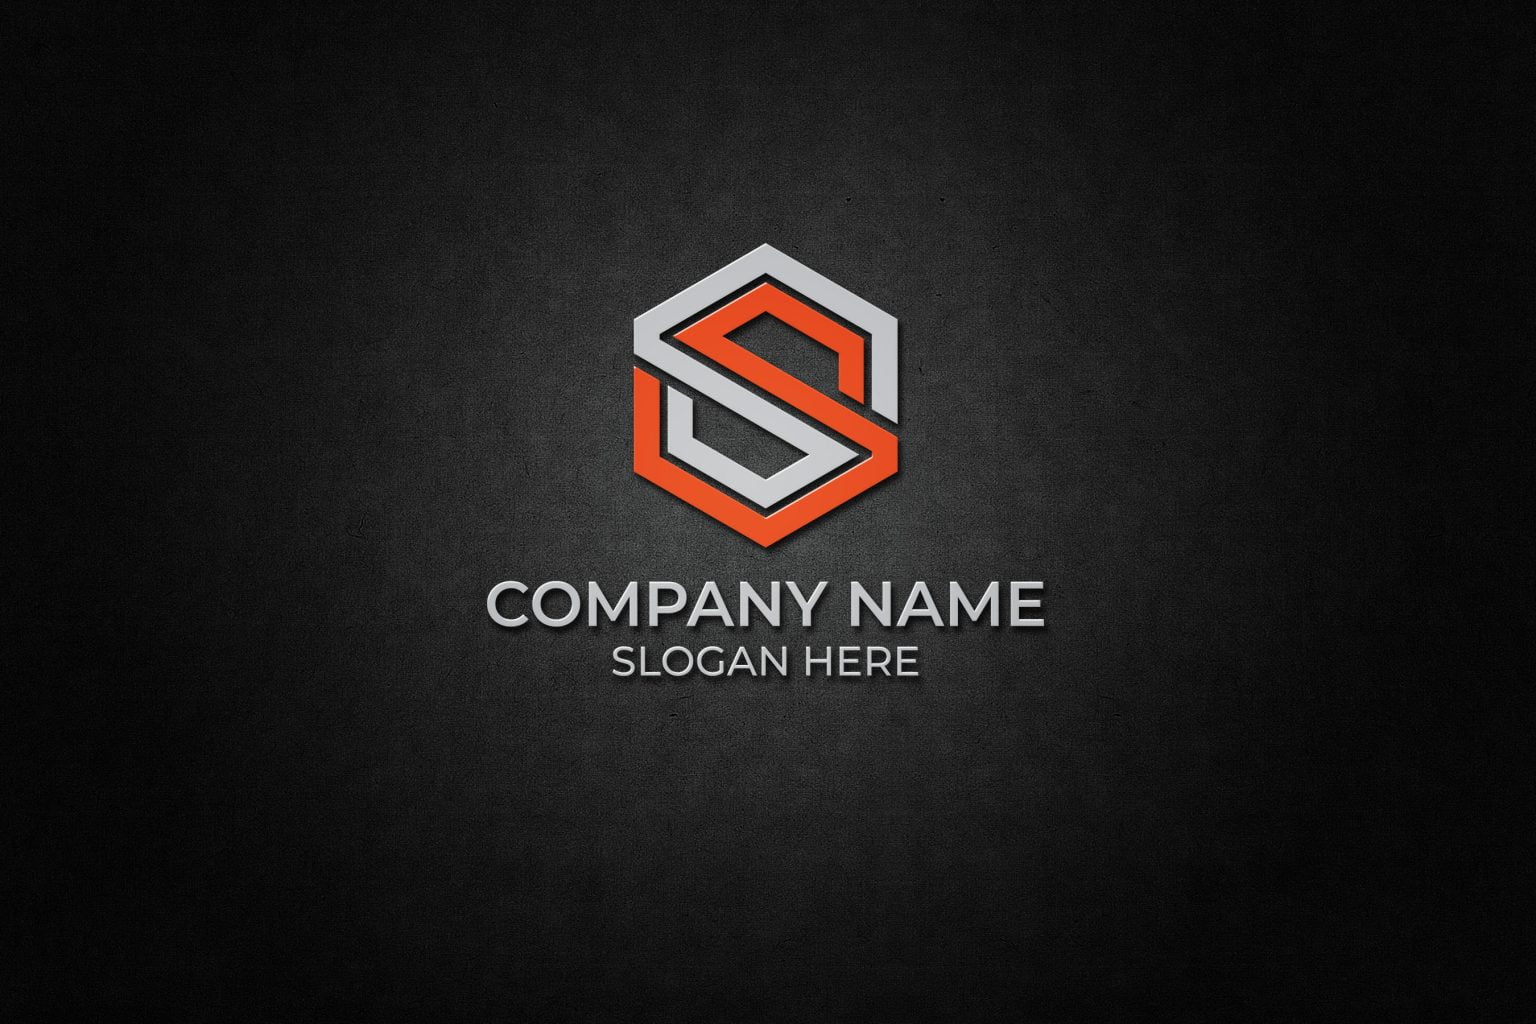 Initial SS Letter logo Free Vector Download – GraphicsFamily